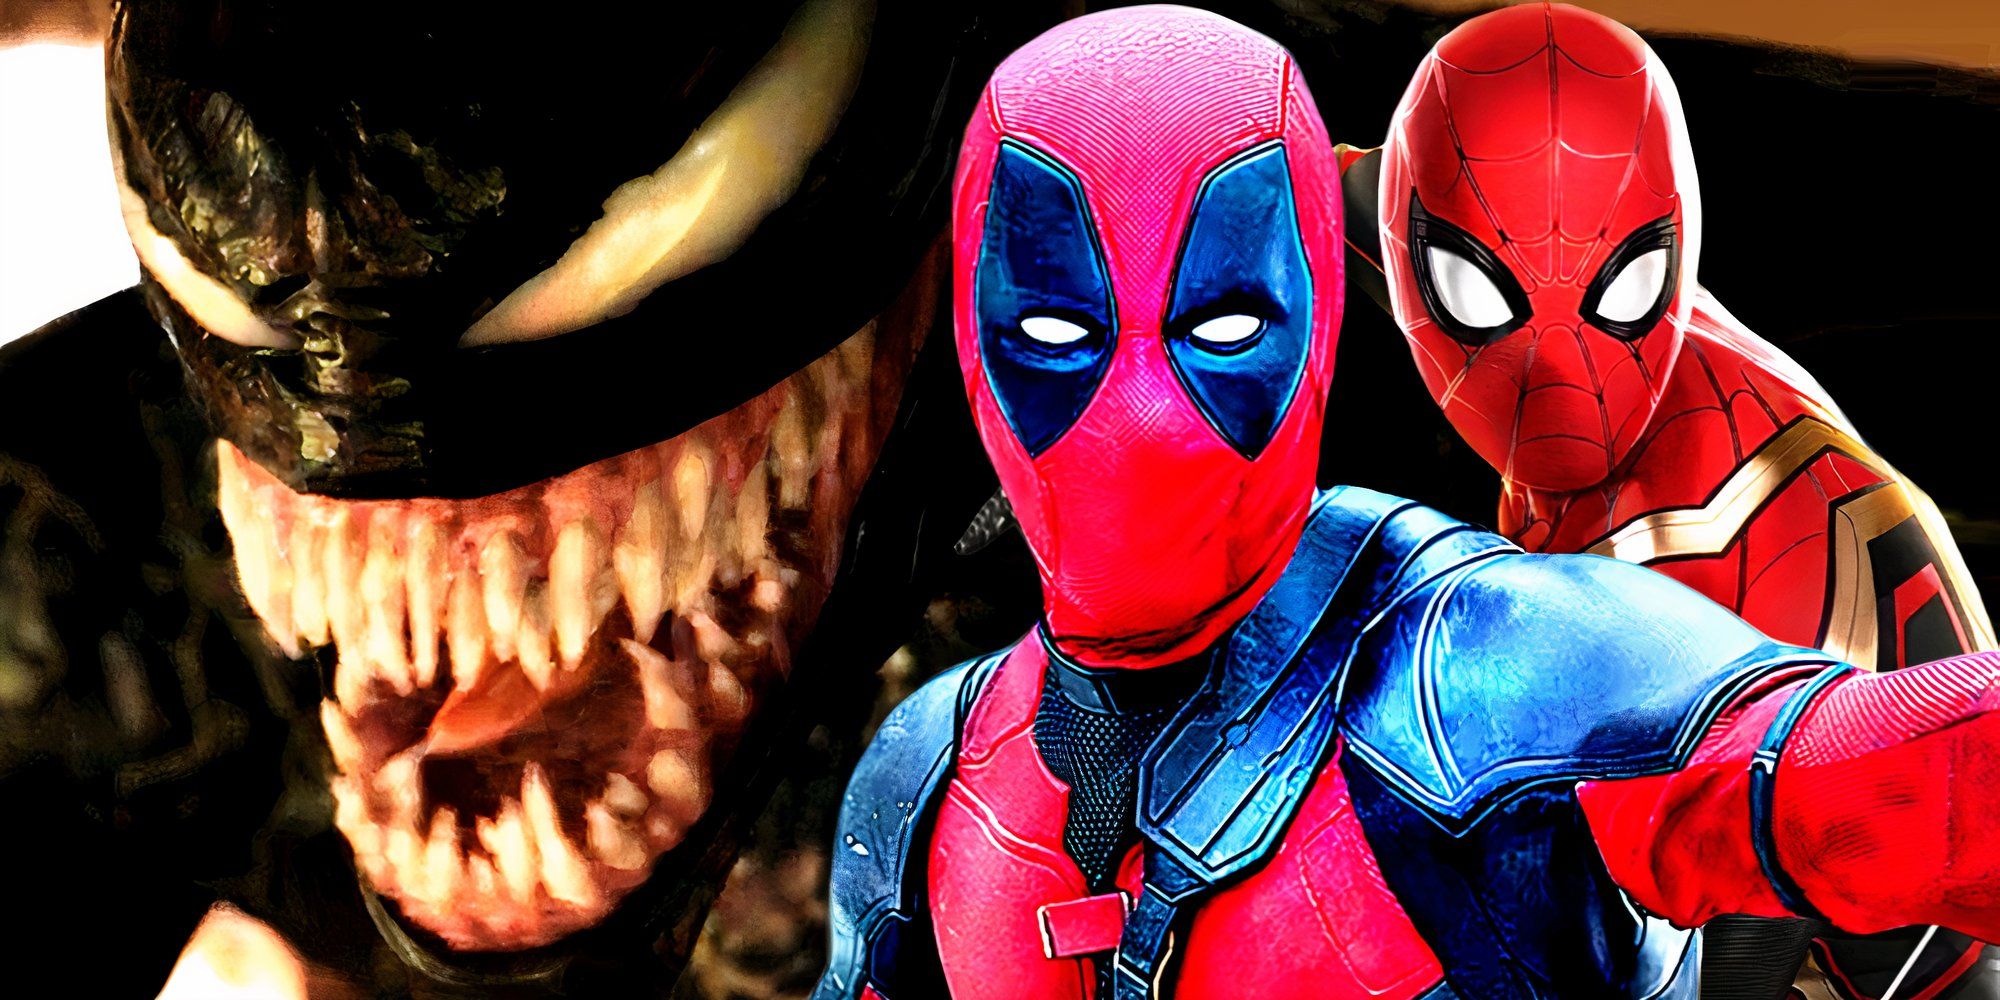 Deadpool in Deadpool & Wolverine with Spider-Man in Spider-Man No Way Home next to Venom in Let There Be Carnage's Post-Credits Scene